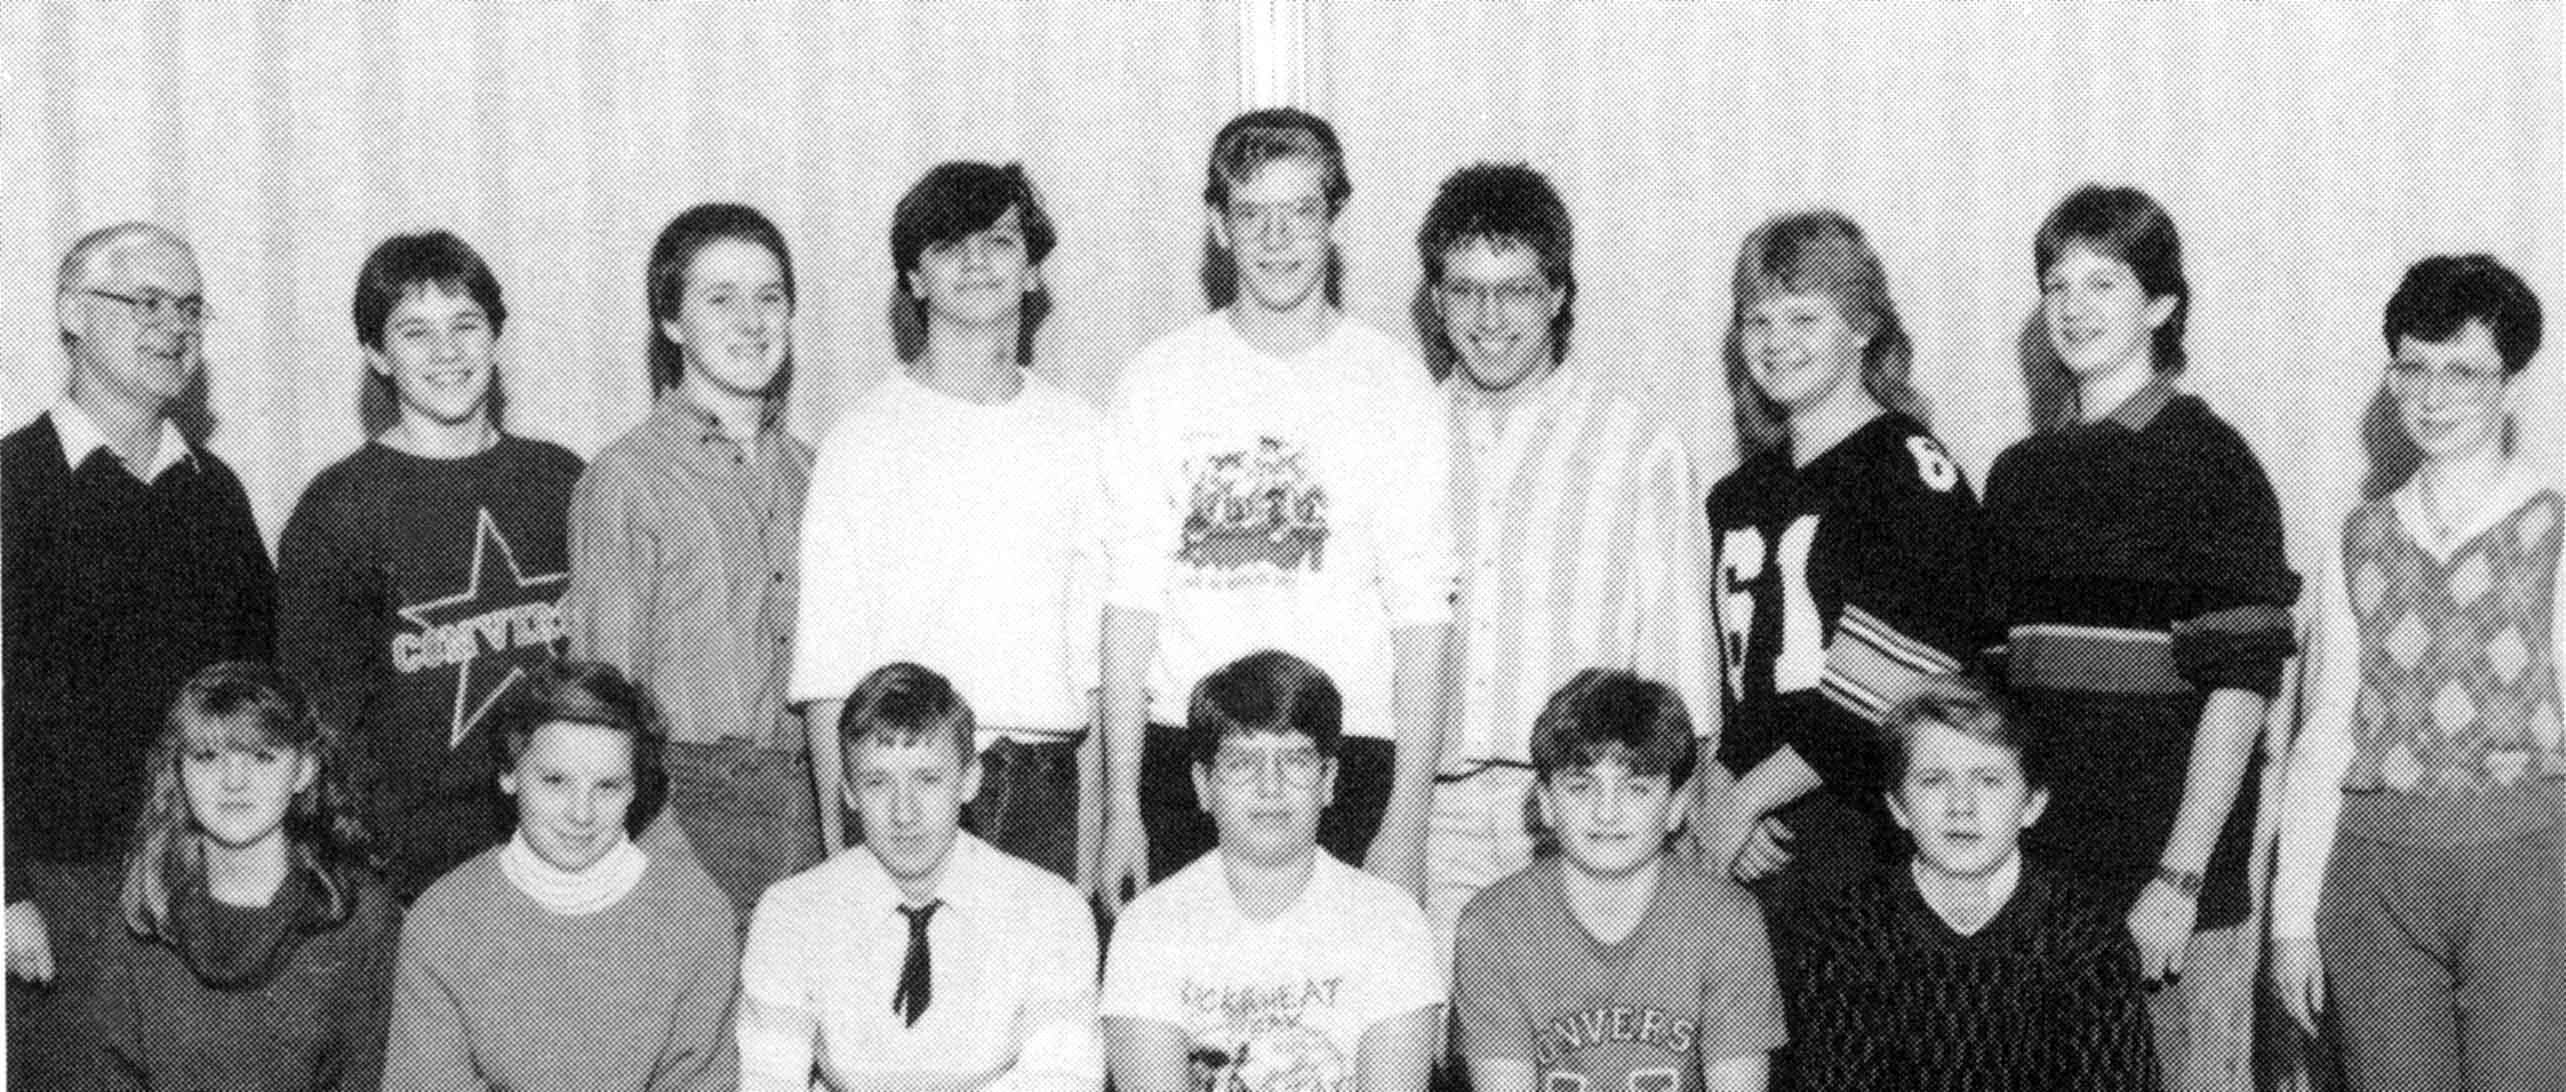 (Click to magnify) FRONT ROW: Michelle Smih, Nancy Phillips, Paul Trudgen, Bruce Jefferson, Bret Meyers, Ian Wagner; ***BACK ROW: Mr. R. Kerford (coach), Geoff Heddle, Dave Archibald, Tim Sweet, Earl Savage, Grant Kloosterman, Chris Smith, Jeremy Acton, M